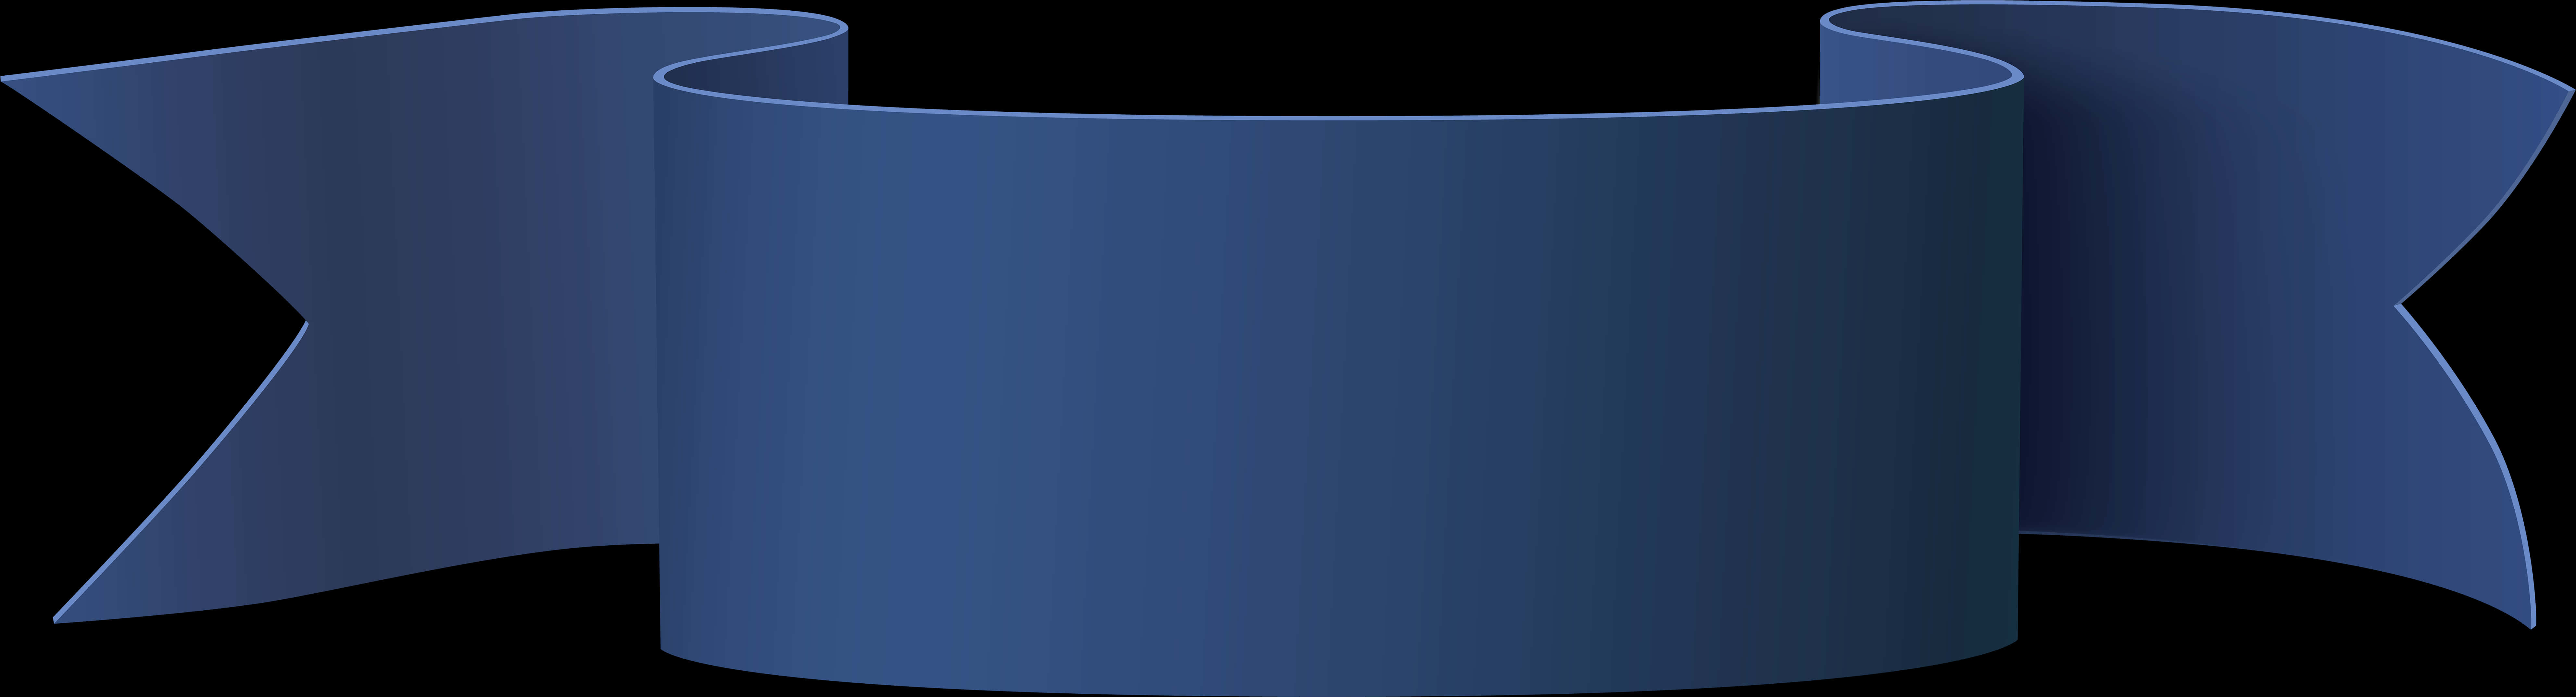 Blue Banner Ribbon Graphic PNG